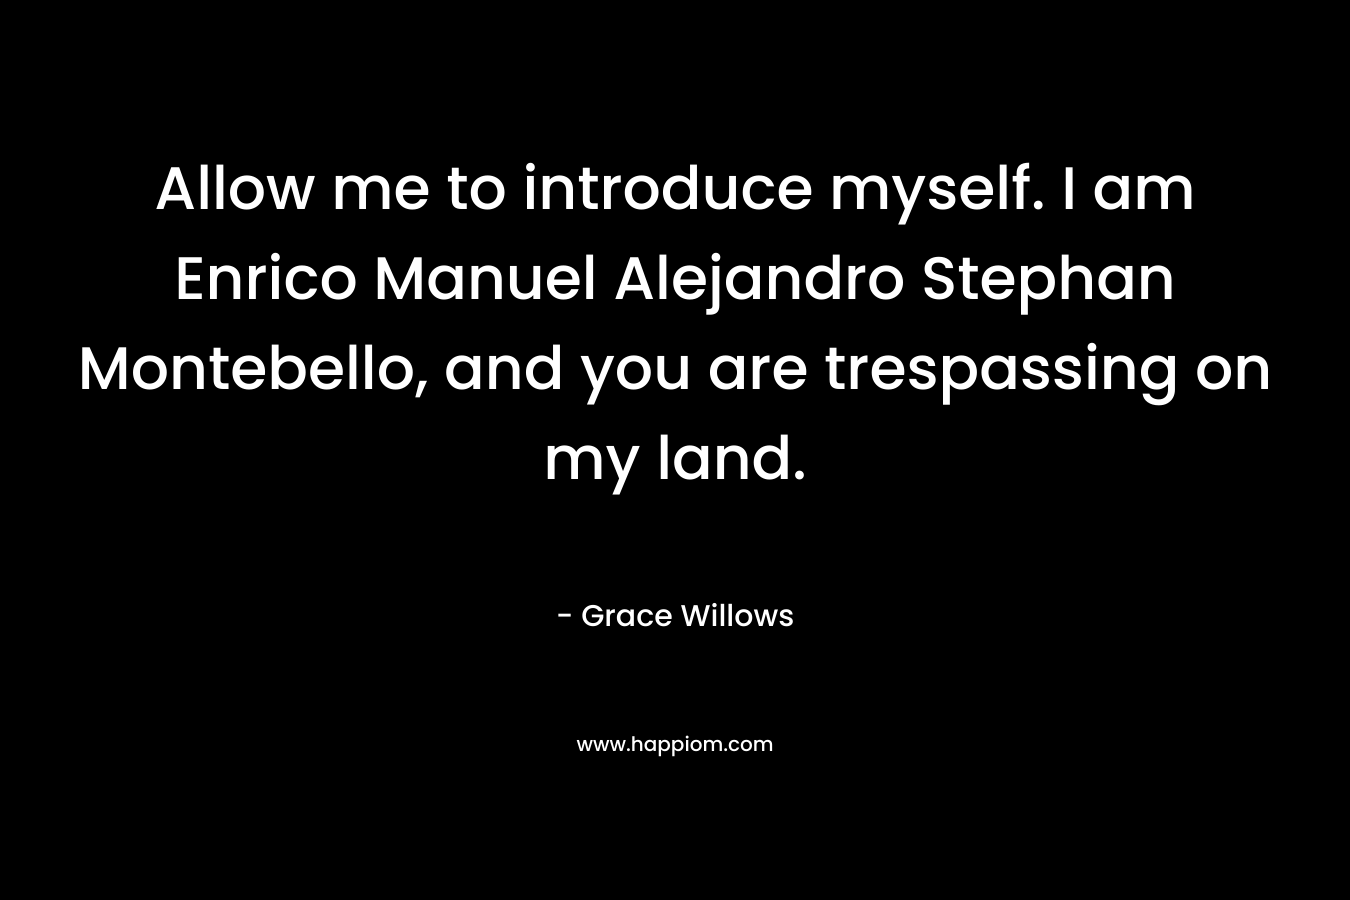 Allow me to introduce myself. I am Enrico Manuel Alejandro Stephan Montebello, and you are trespassing on my land. – Grace Willows